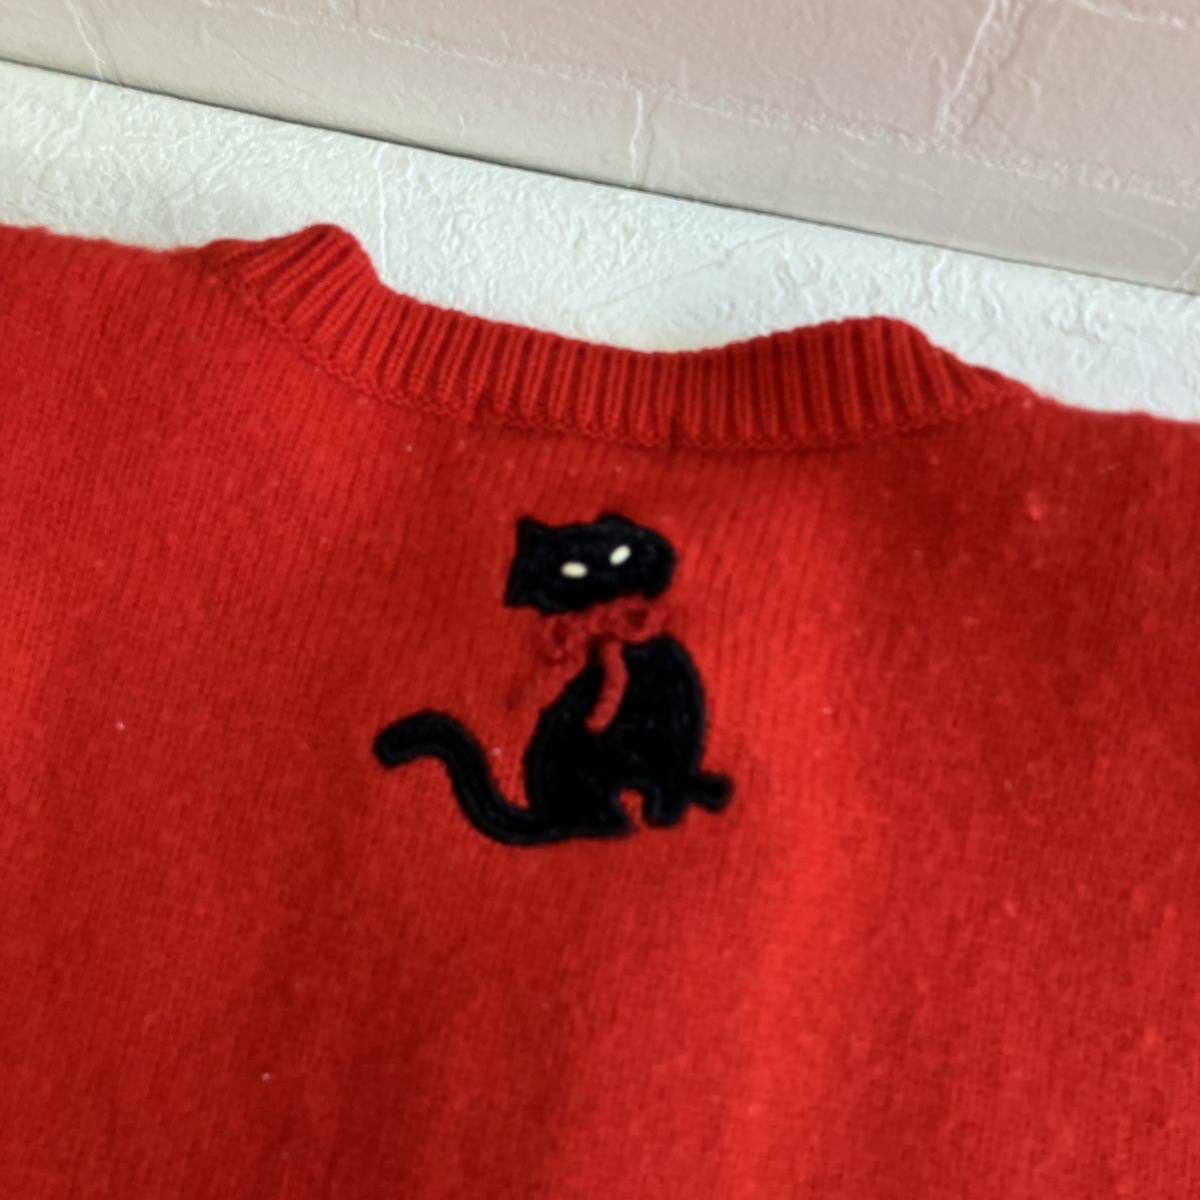  Showa Retro that time thing paserio corporation world Junior size. cardigan red black cat. up like embroidery wool 100% Vintage knitted for girl 